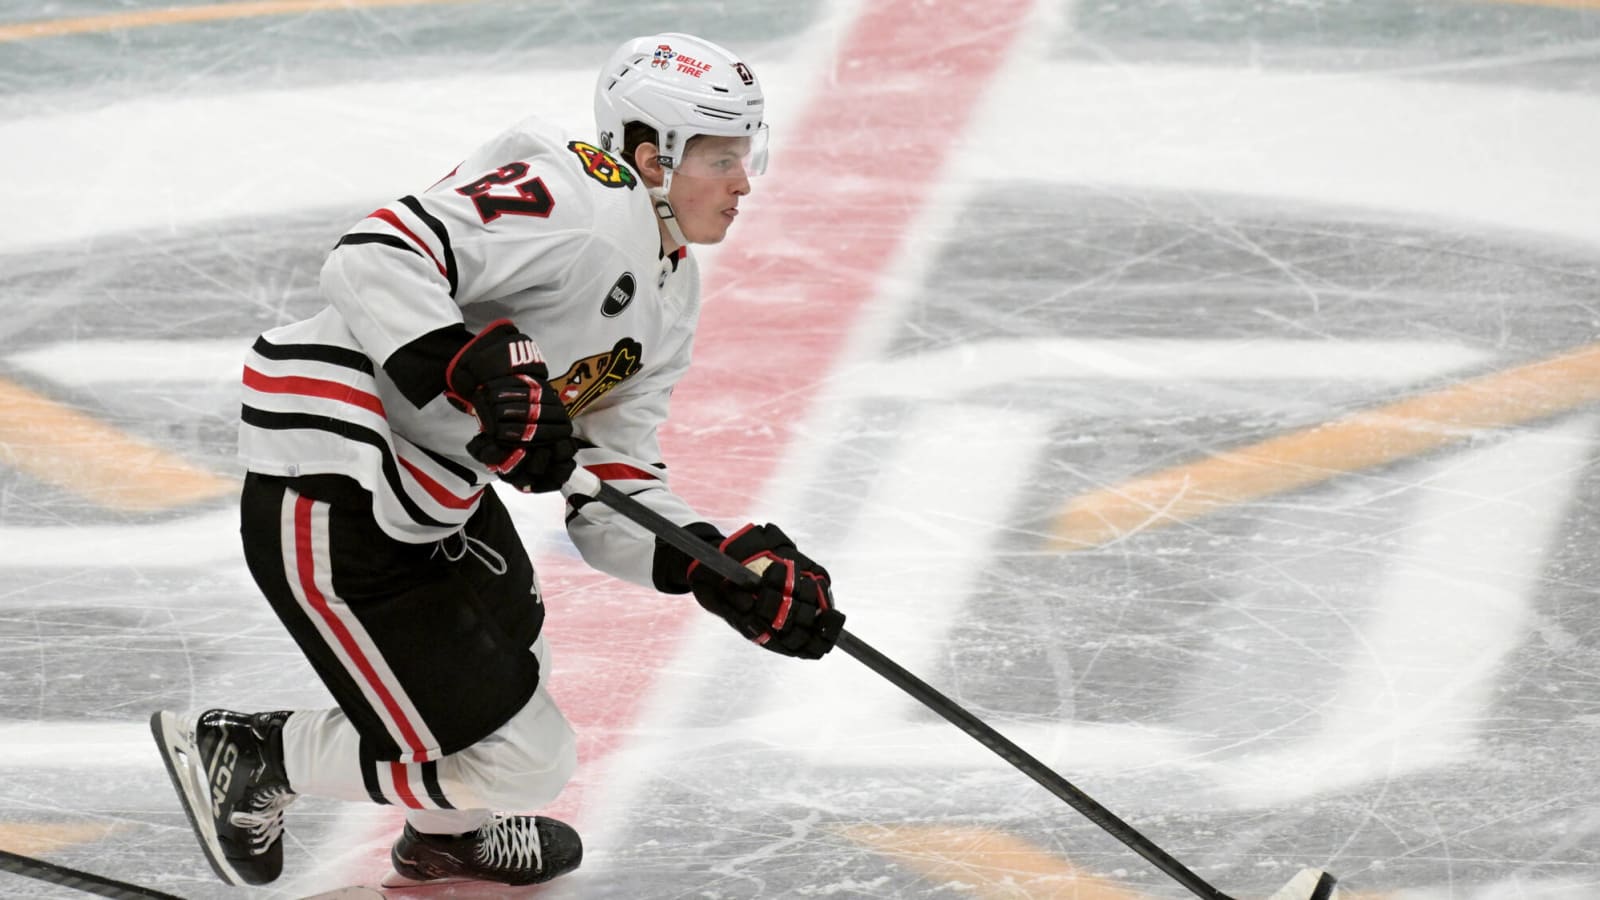 Blackhawks at IIHF Worlds: Lukas Reichel Dishes 2 Assists, Germany Routs Latvia